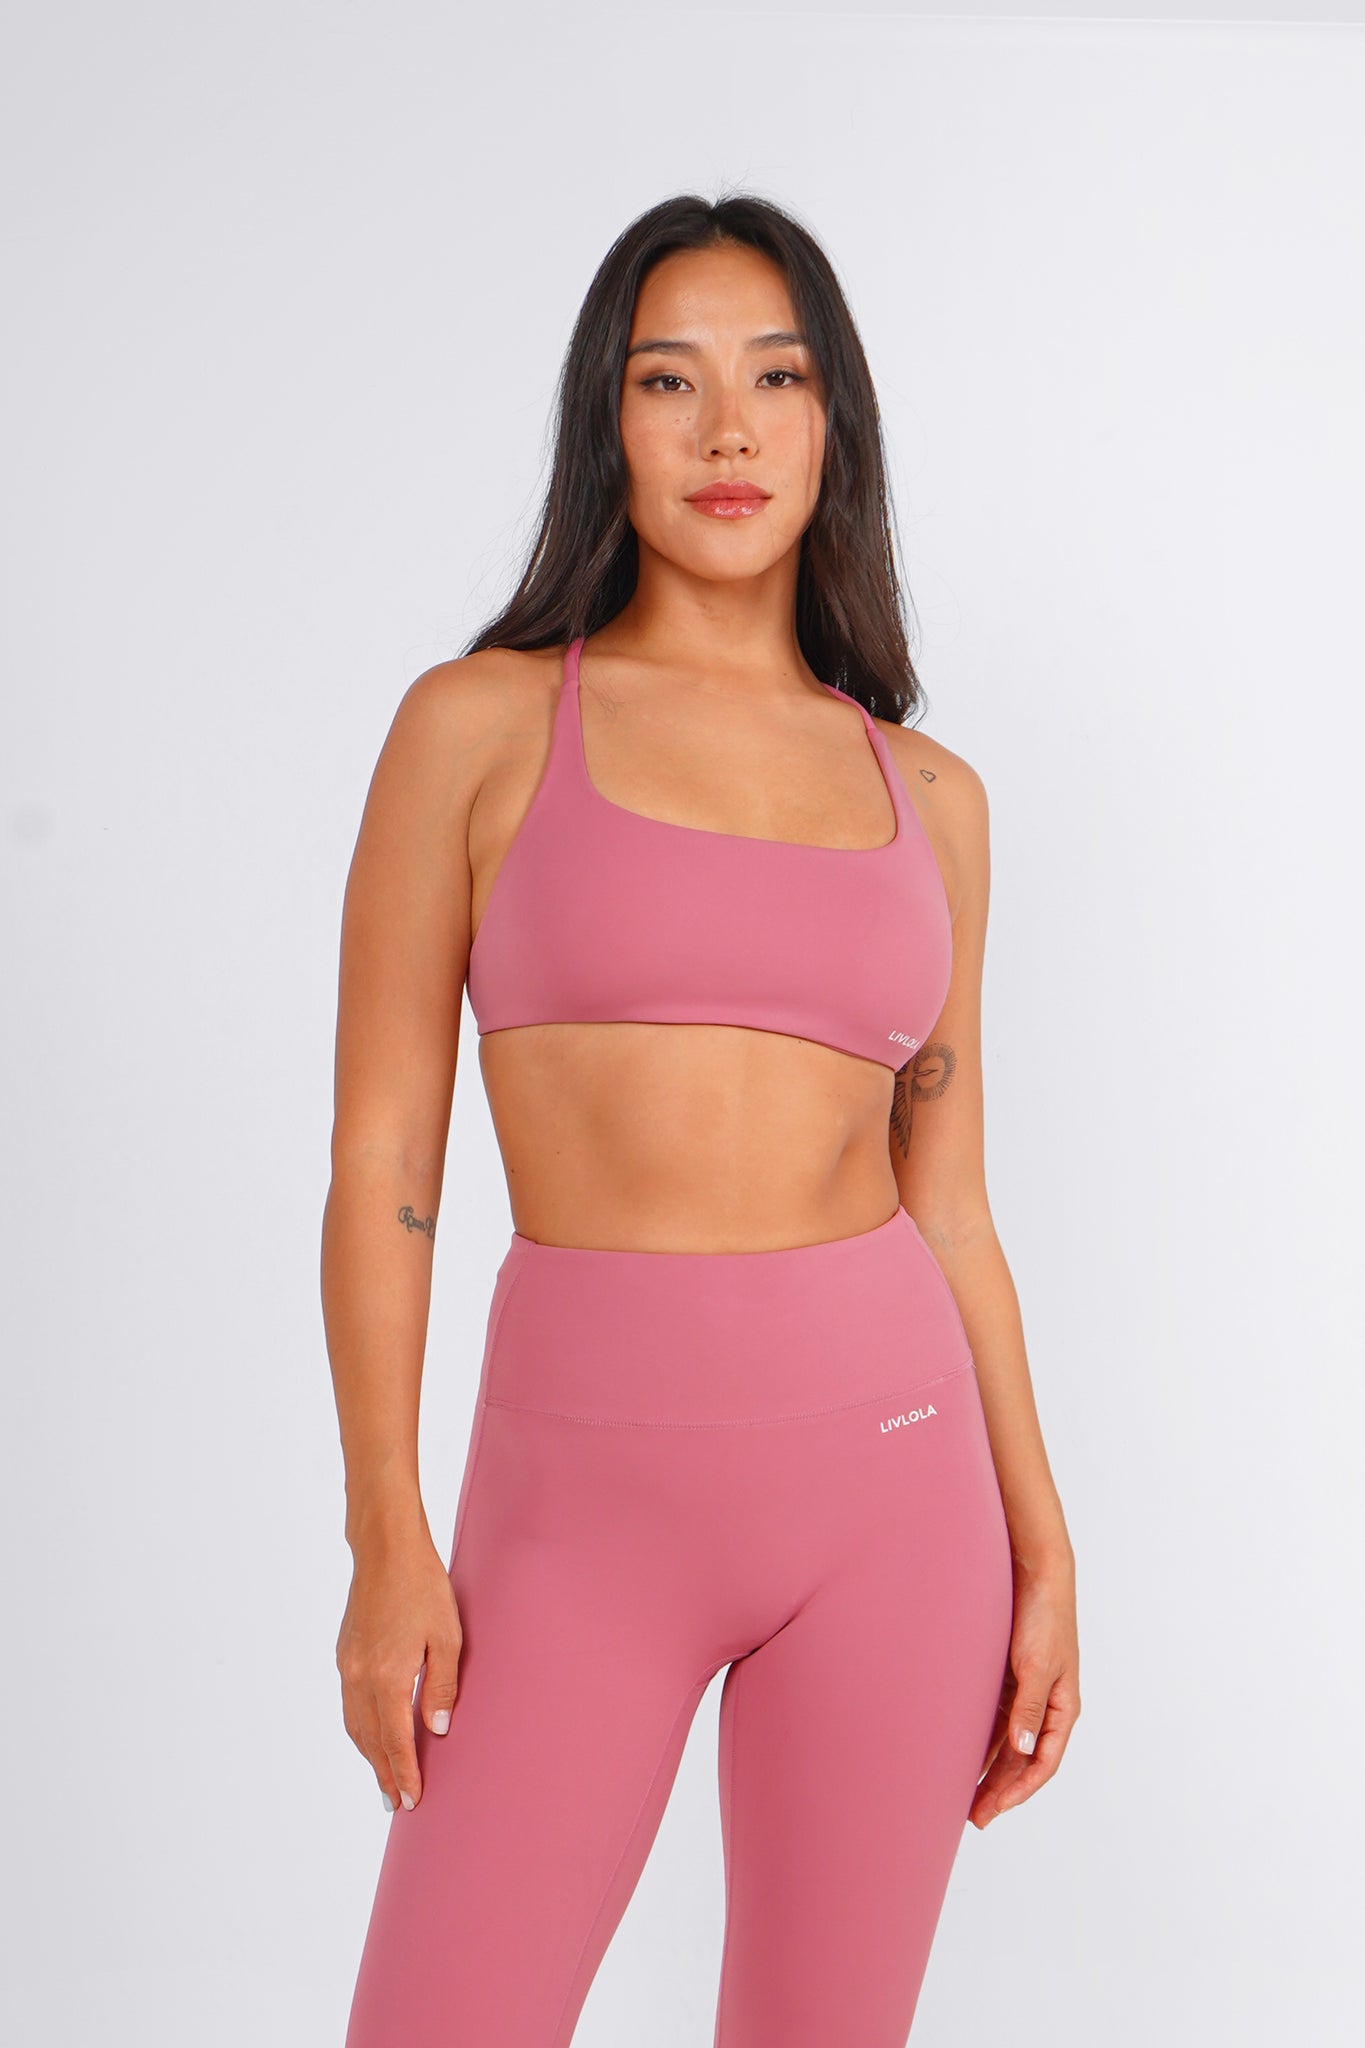 Hot-Sale Womens Pink Pilates Fitness Wear Yoga Wear Sets, 2 Piece Comfort  Sports Bra with Pocket Design Yoga Leggings Activewear Suit, Gym Running  Clothes Set - China Yoga Wear Sets and Sports